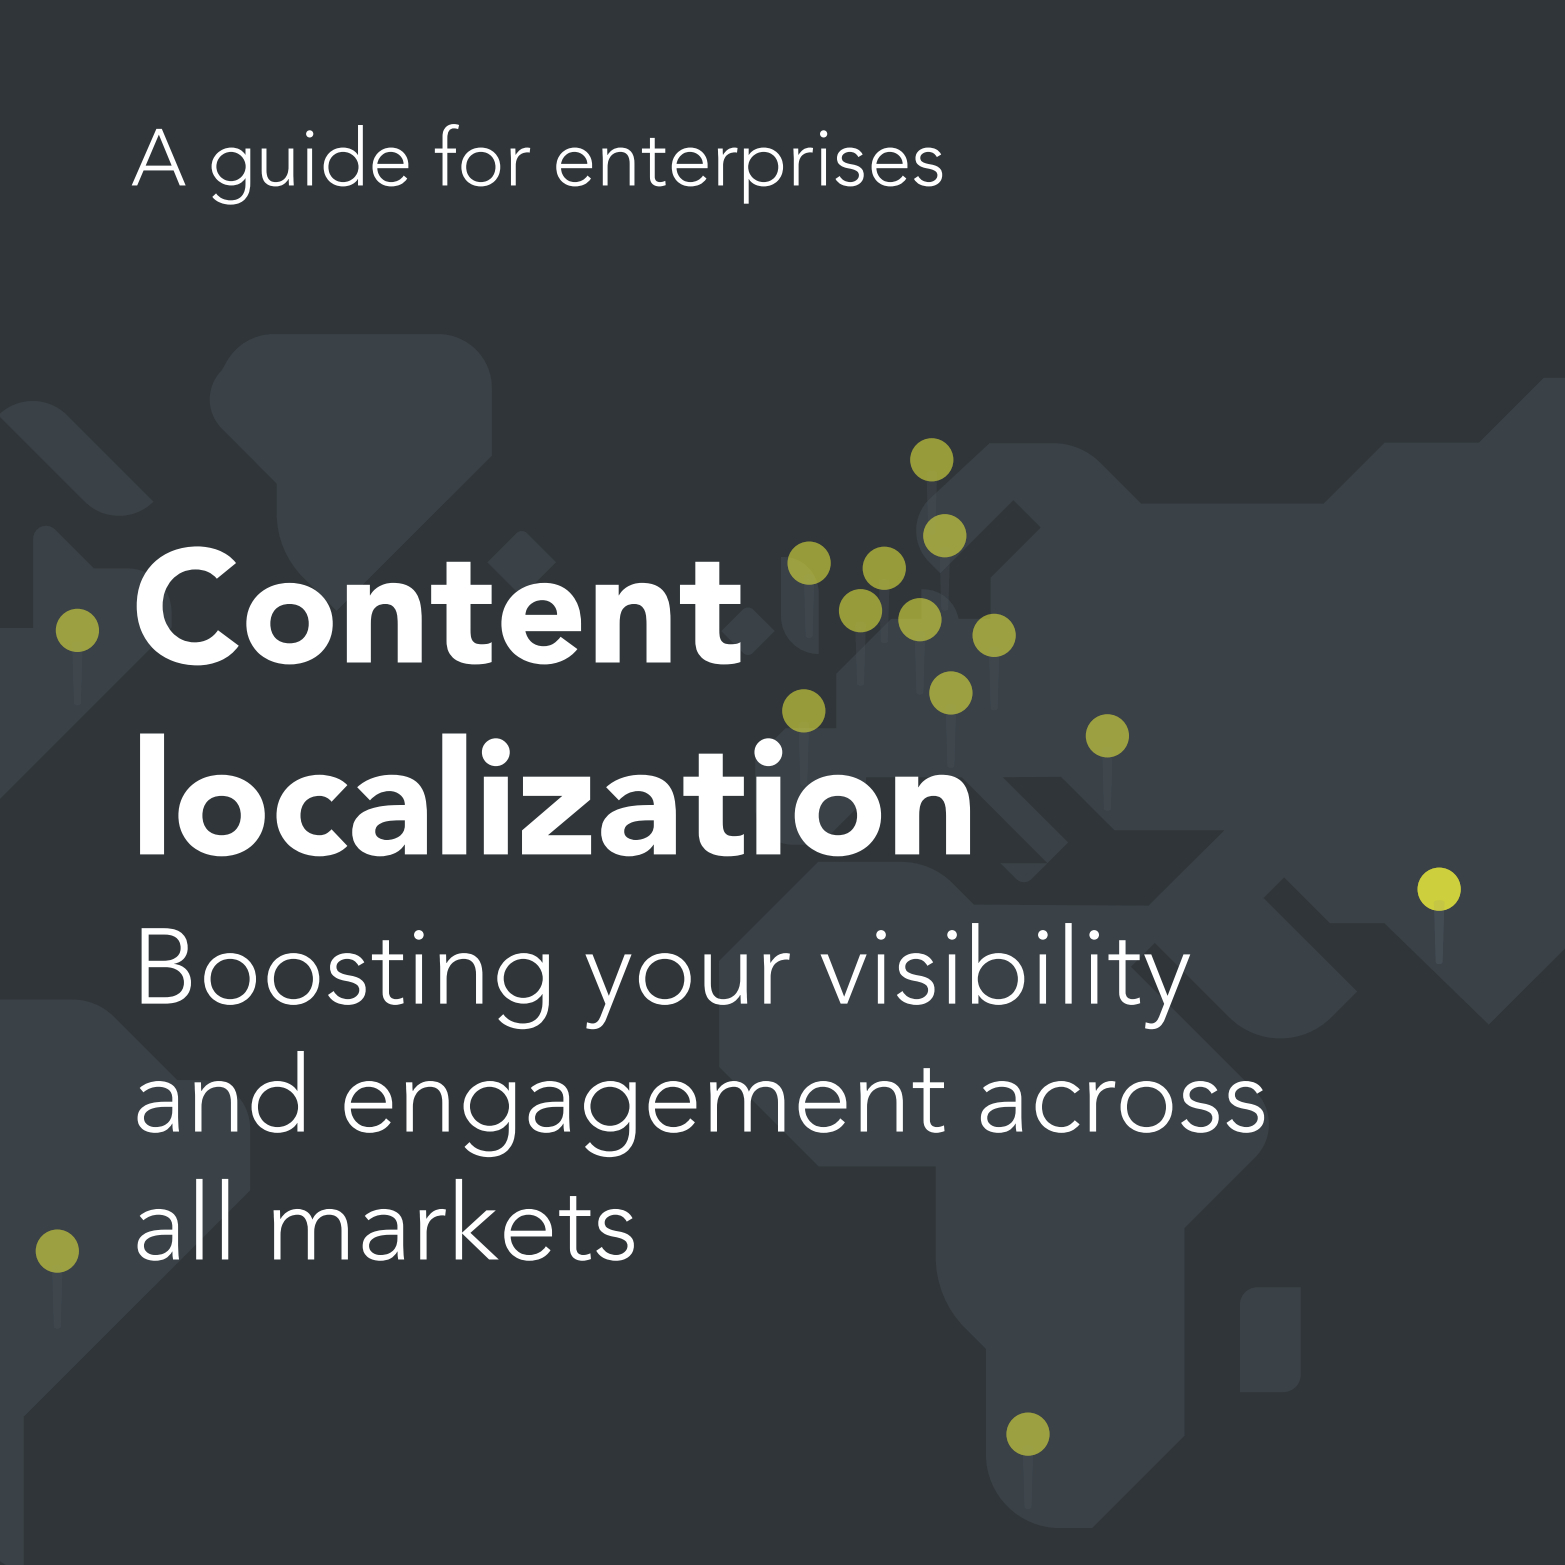 Content localization - boosting your visibility and engagement across all markets